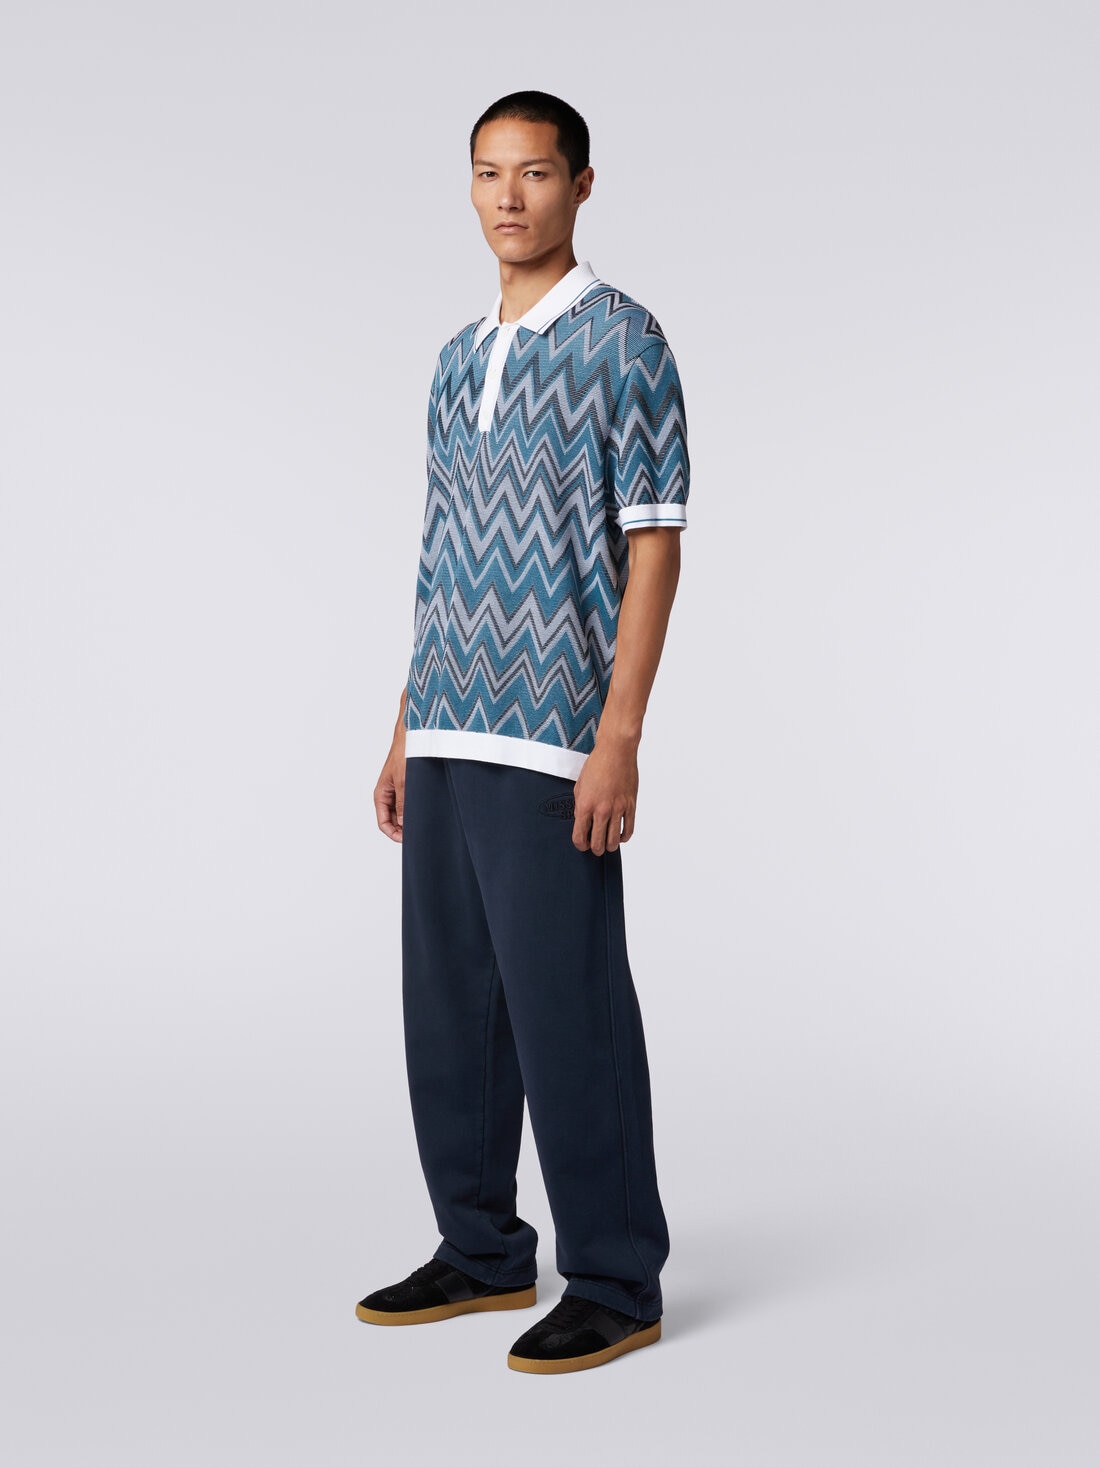 Polo shirt in zigzag knit with plain details, Black    - TS24S202BK035WS72FQ - 2